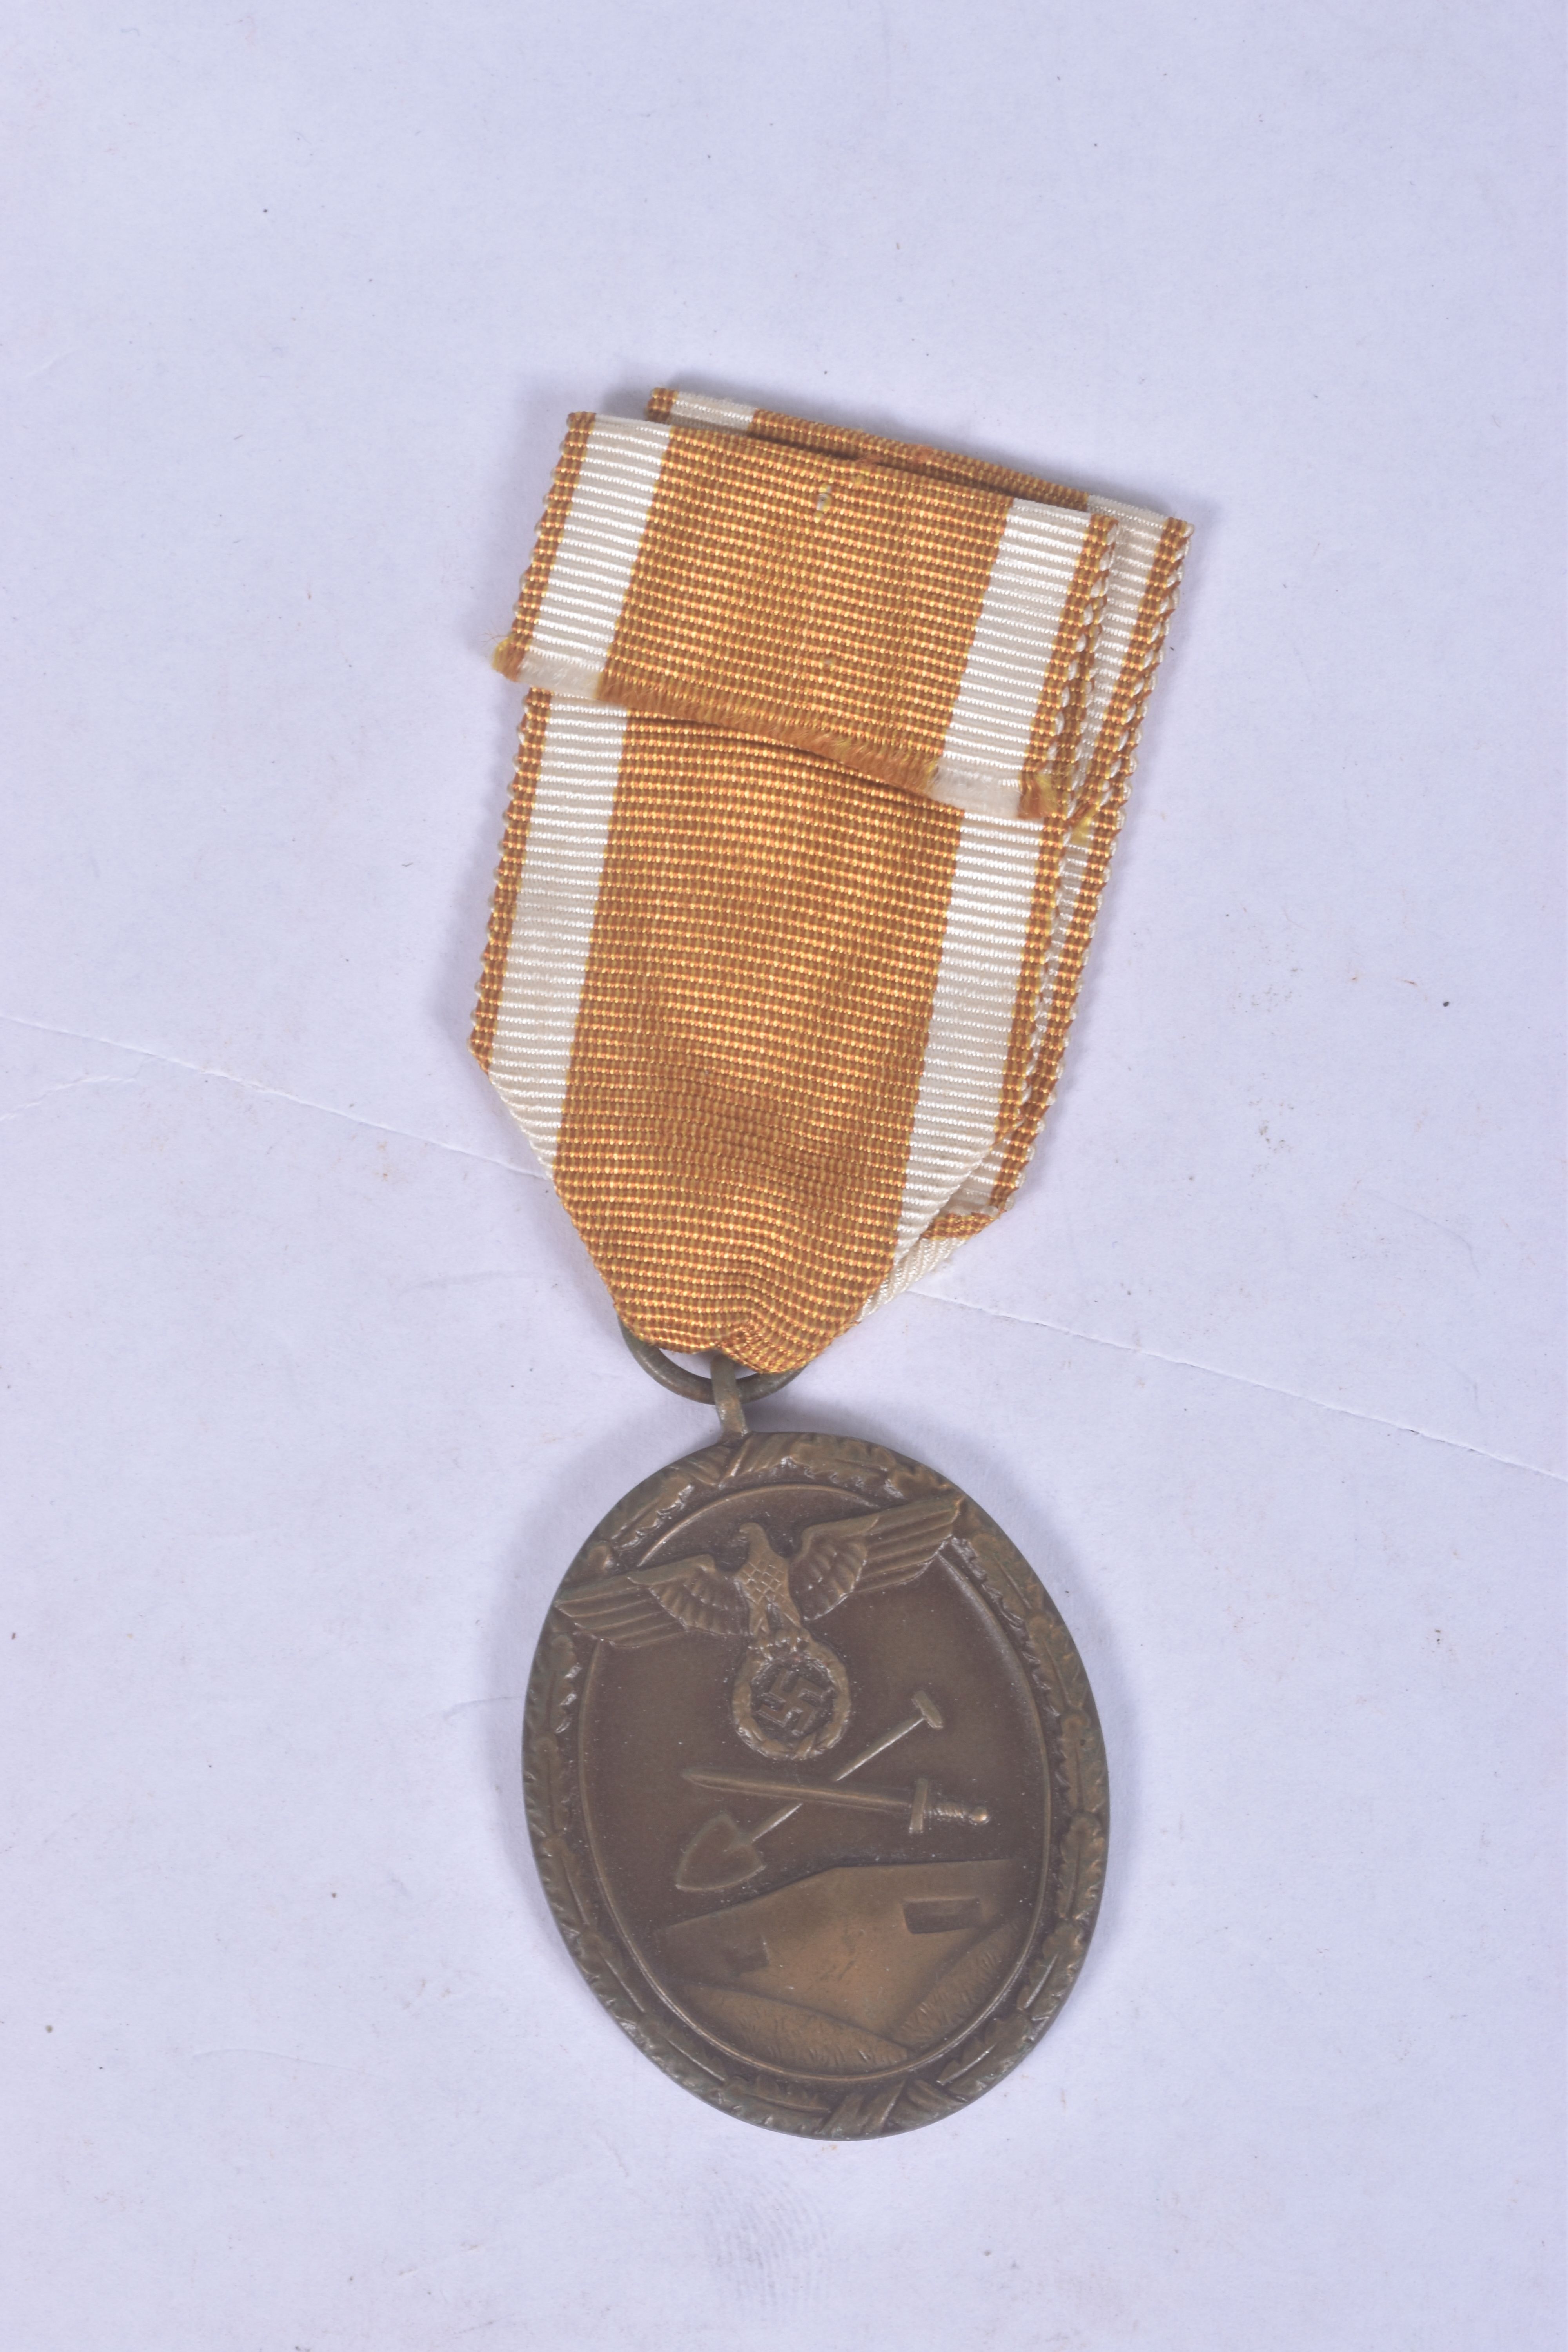 A WW1 HAMBURG CROSS AND A WW2 WEST WALL MEDAL, BOTH MEDALS COME WITH a correct ribbon and are in - Image 4 of 5